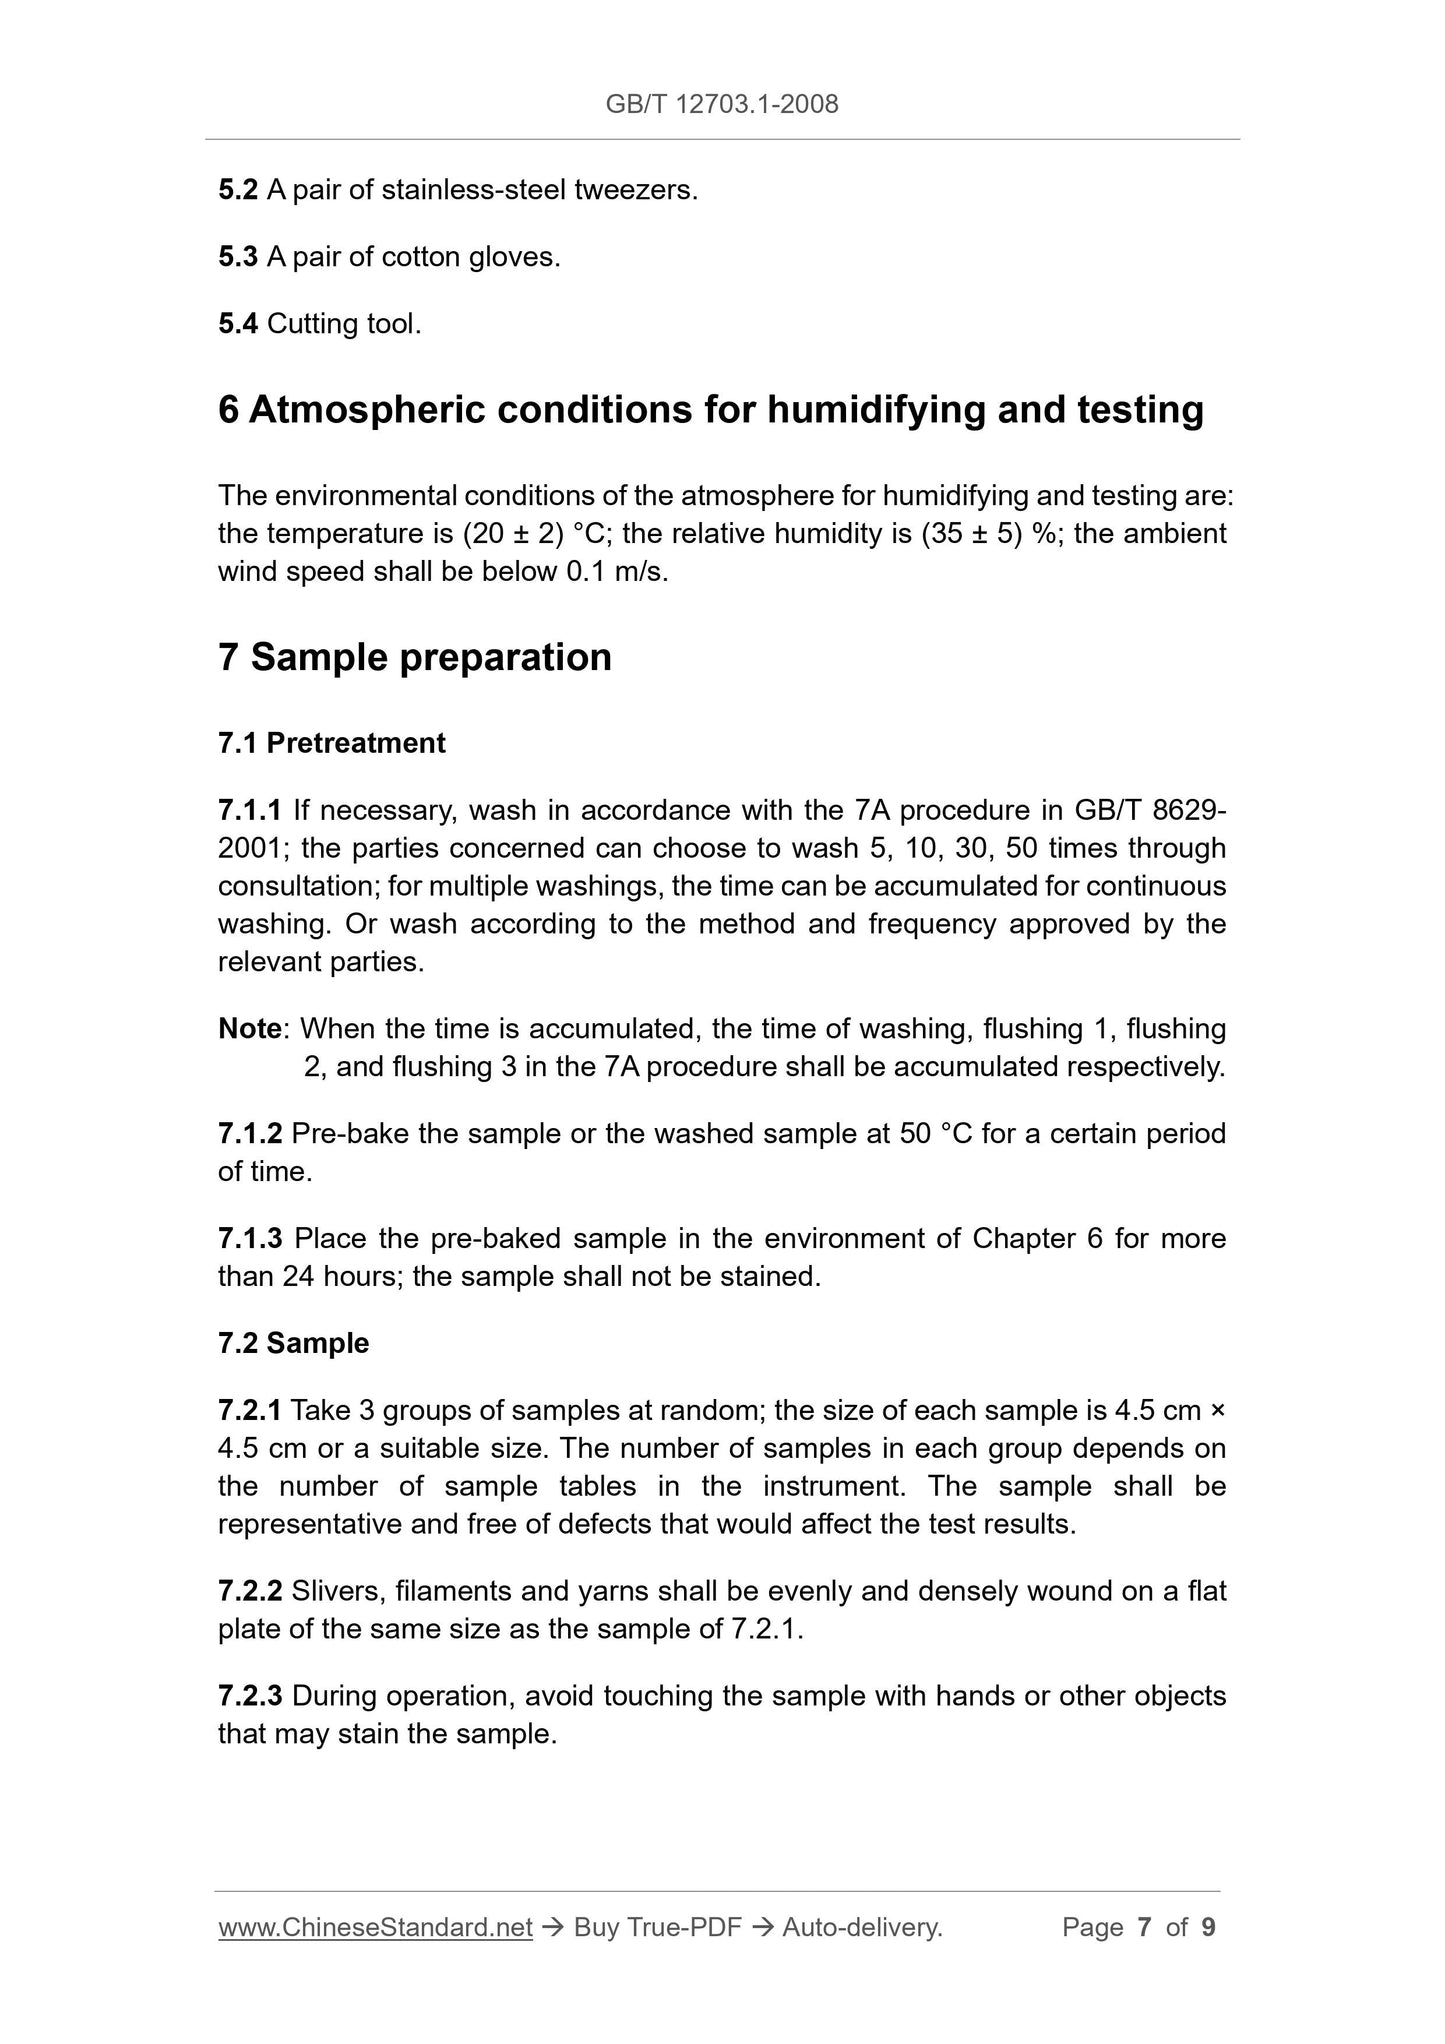 GB/T 12703.1-2008 Page 4